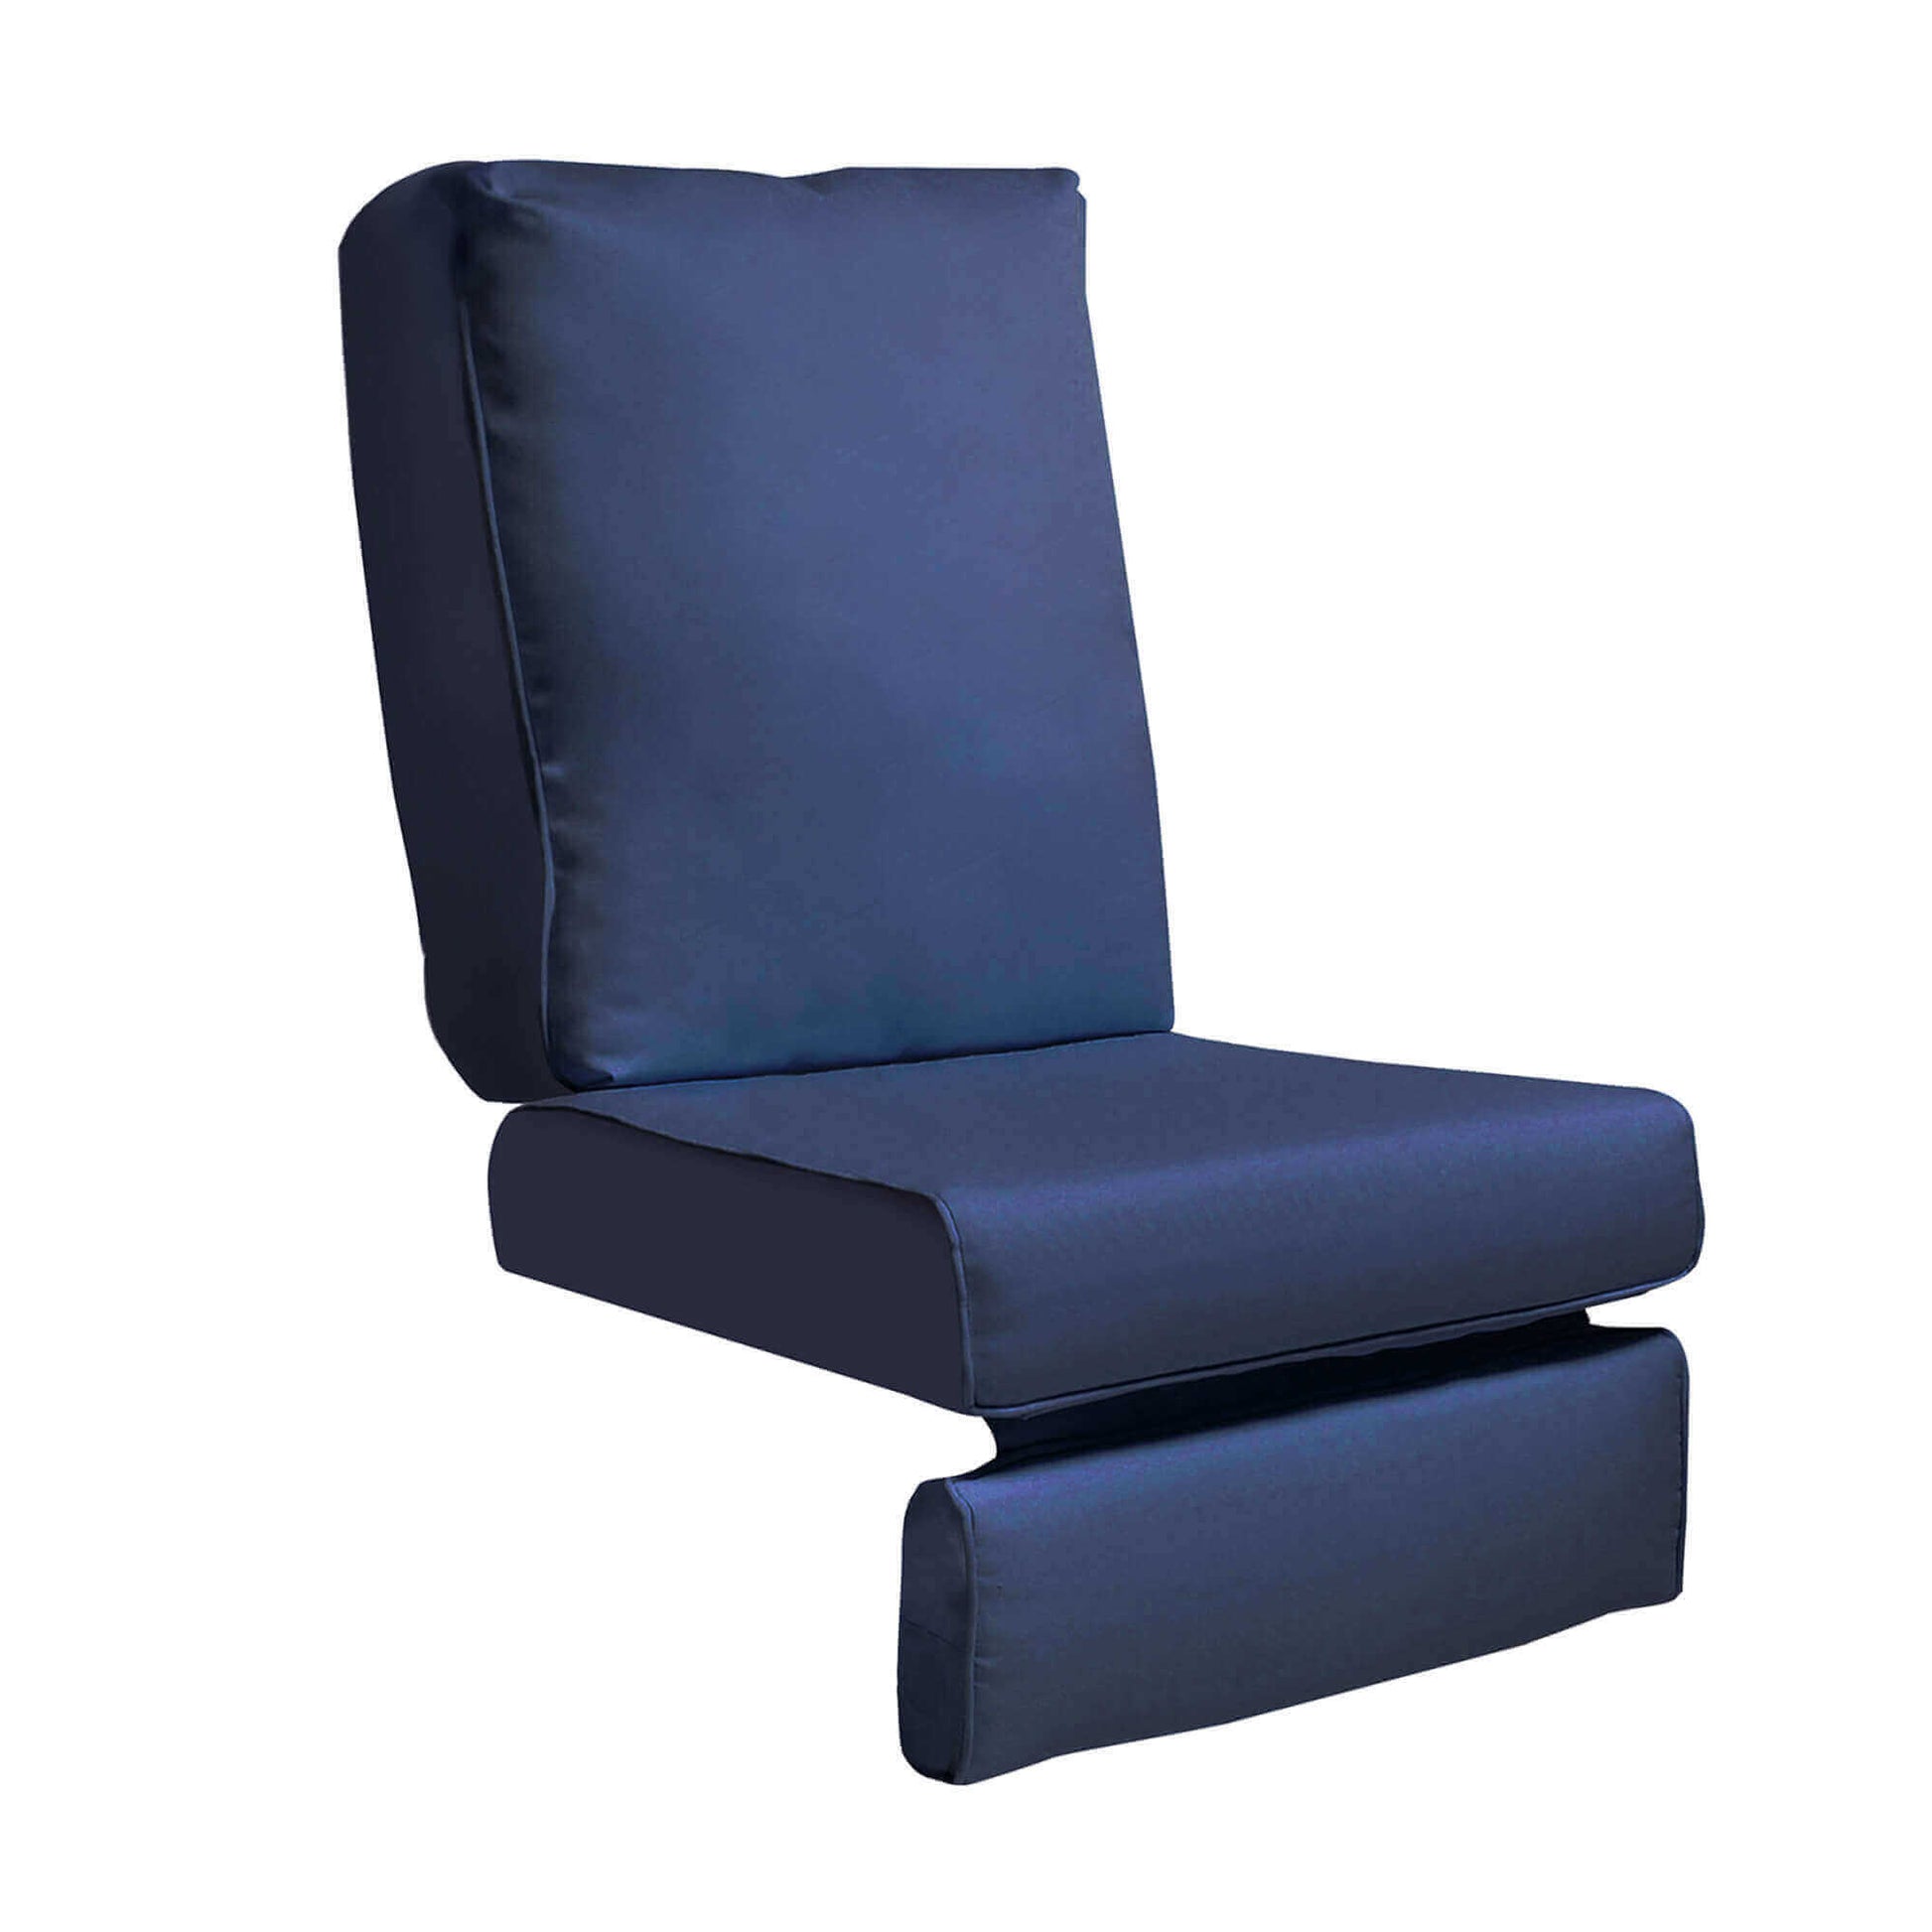 Revitalize Your Recliner: Replacement Cushions for Ultimate Comfort